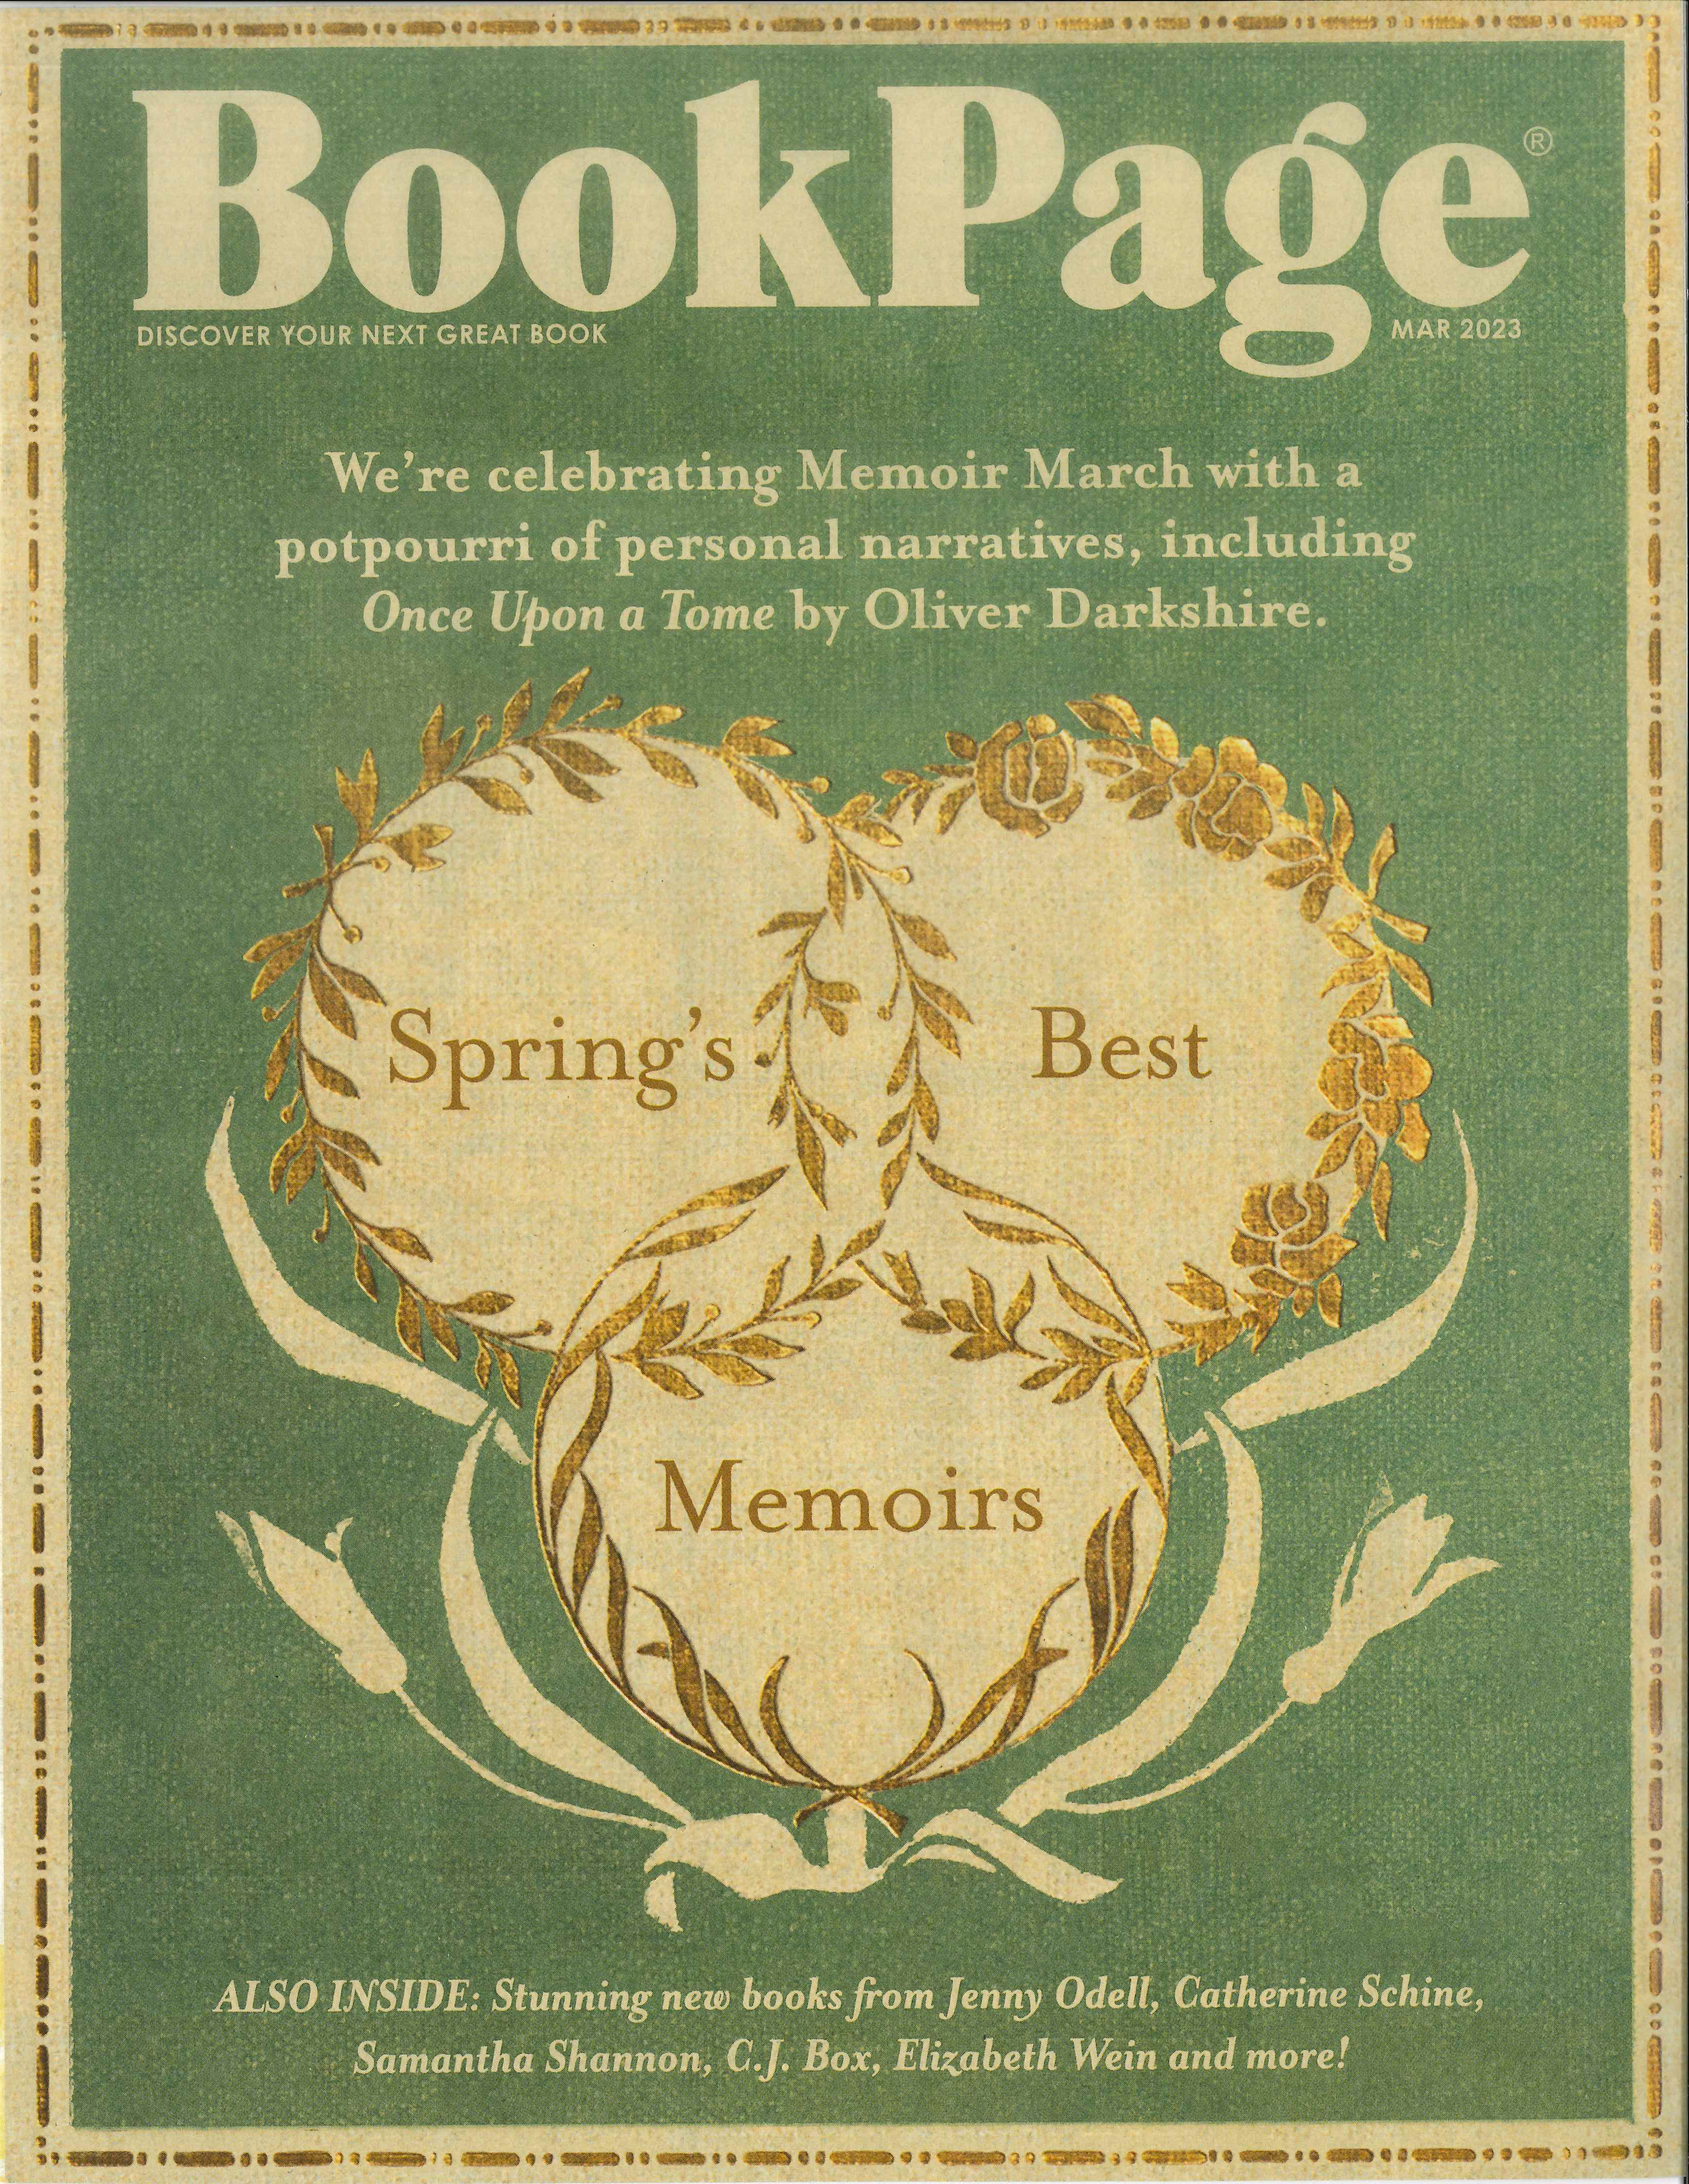 A link to the Book Page Magazine with an image of its current cover.